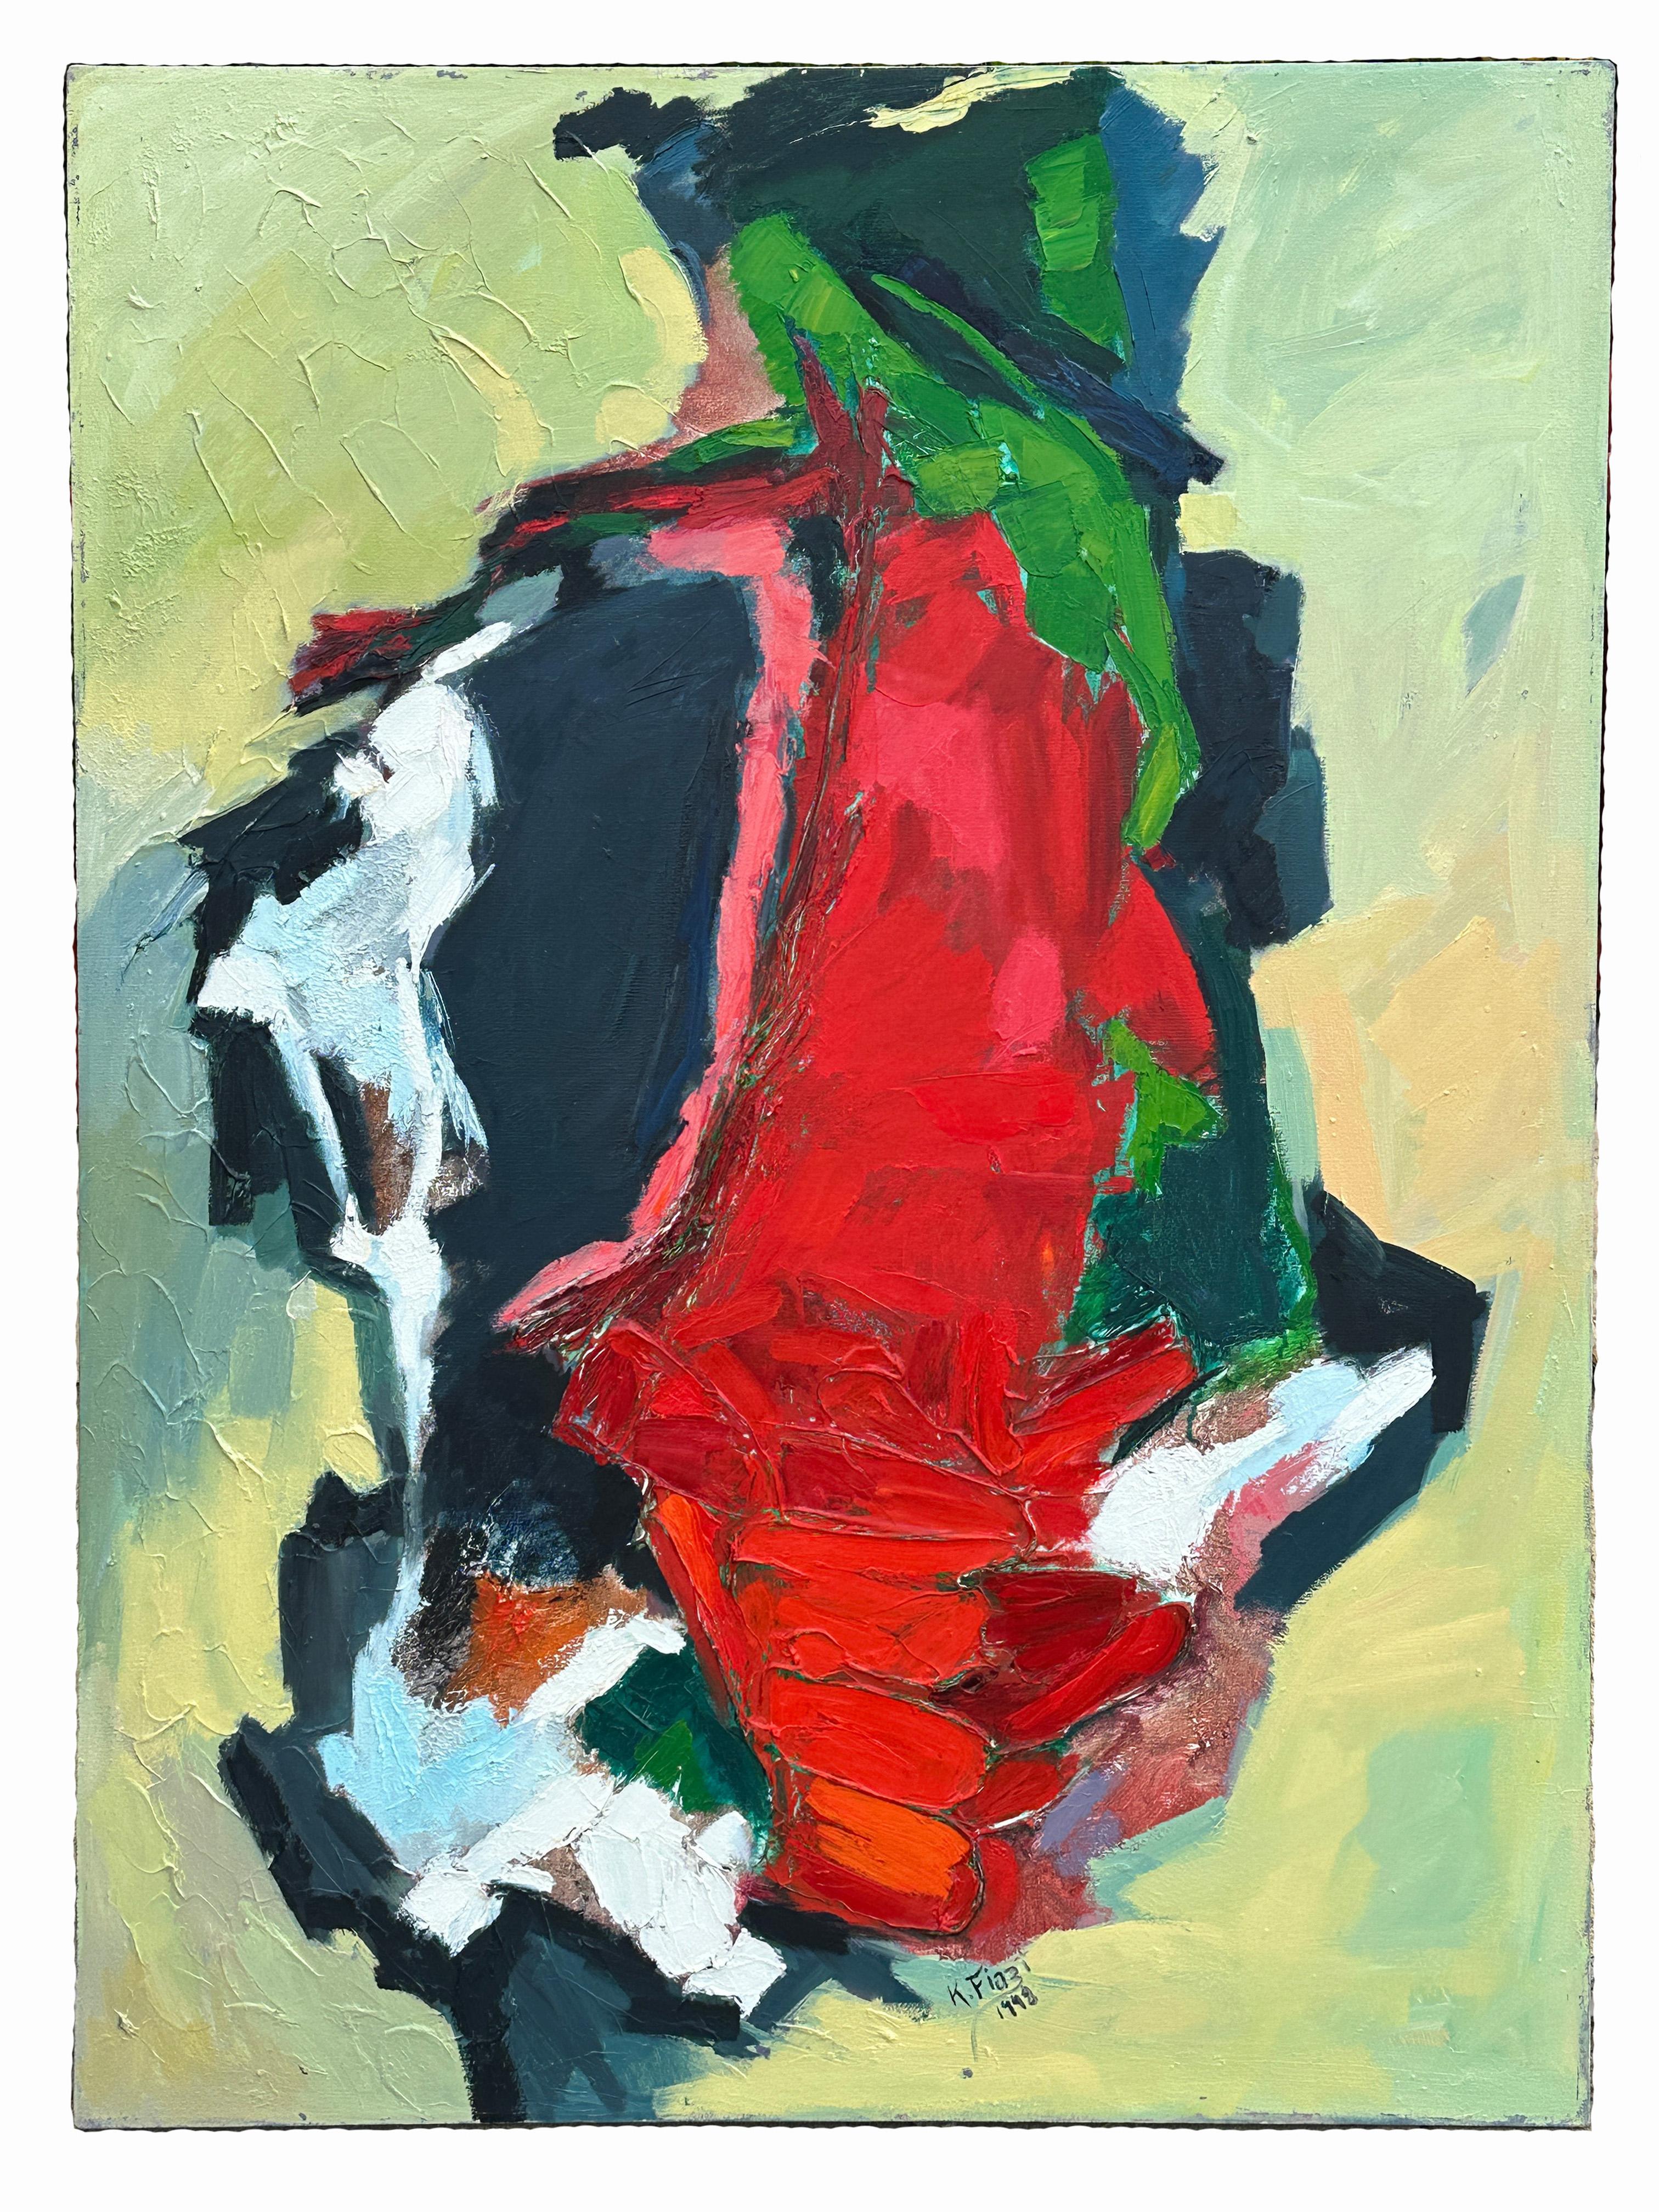 Eric Fiazi Abstract Painting - Colorful Light Green and Red Abstract - Acrylic on Canvas by Eric K. Fiazi